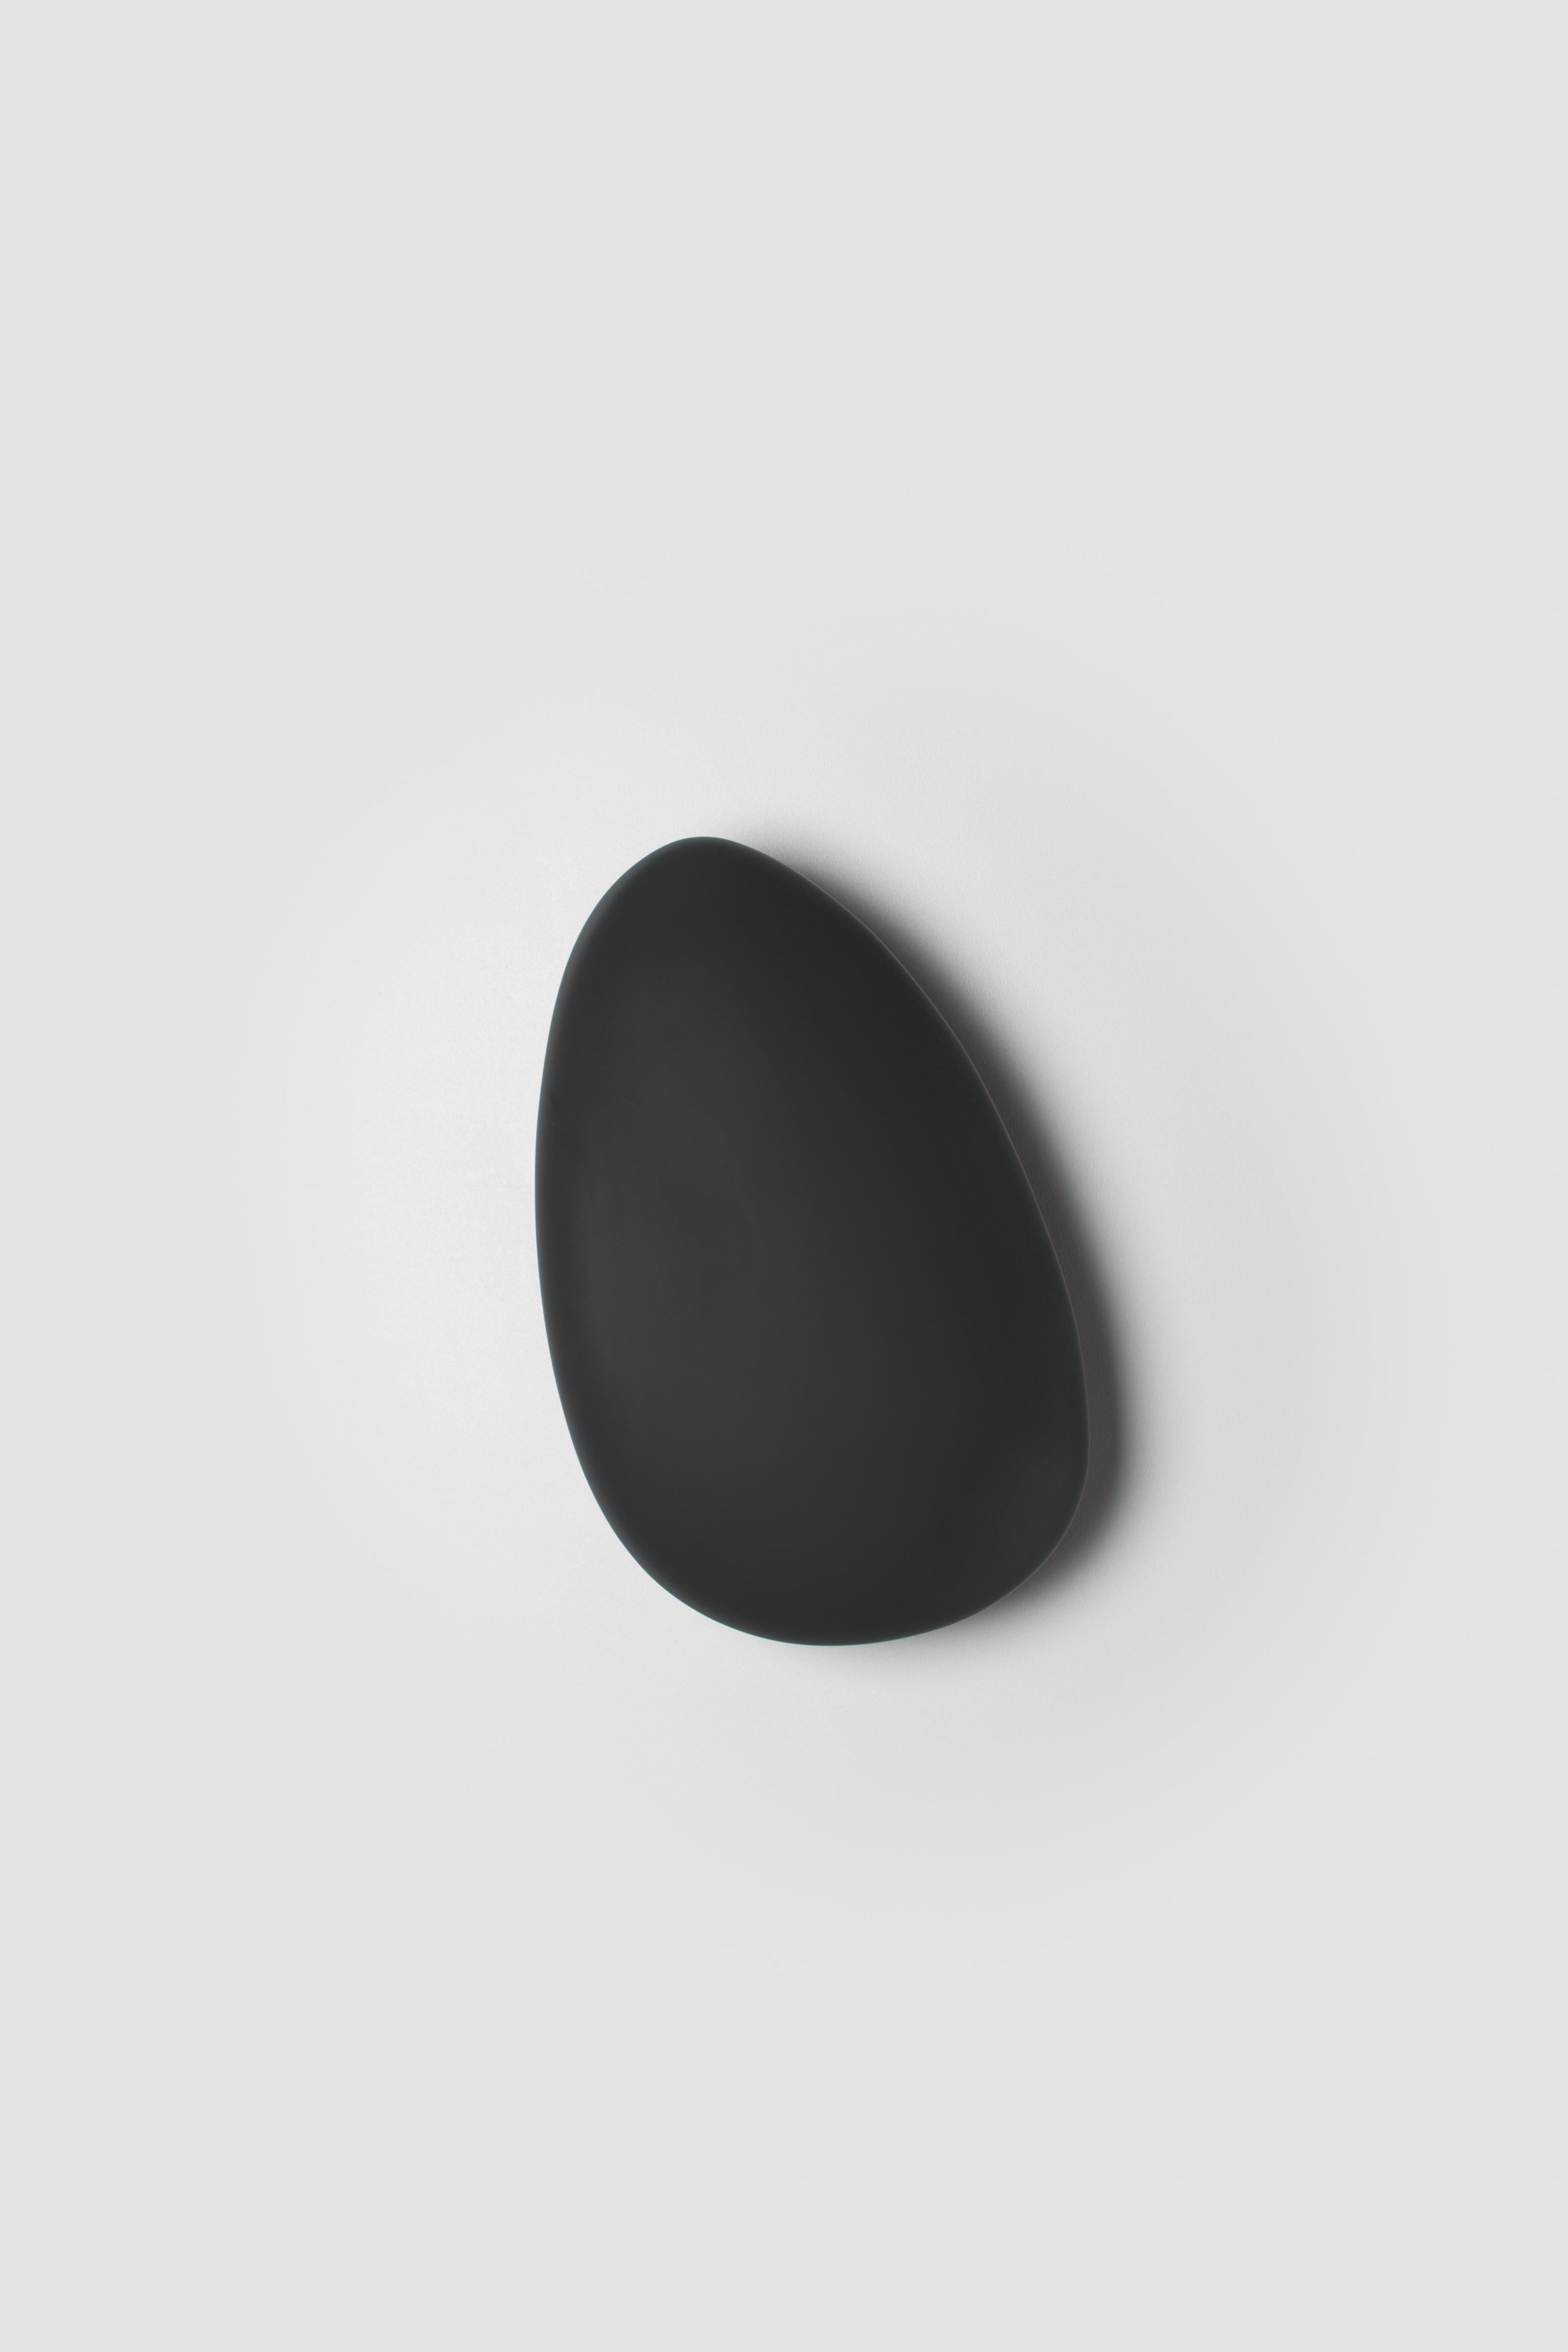 Glass Contemporary Wall Lamp 'Pebble' by Andlight, Shape B, Slate For Sale